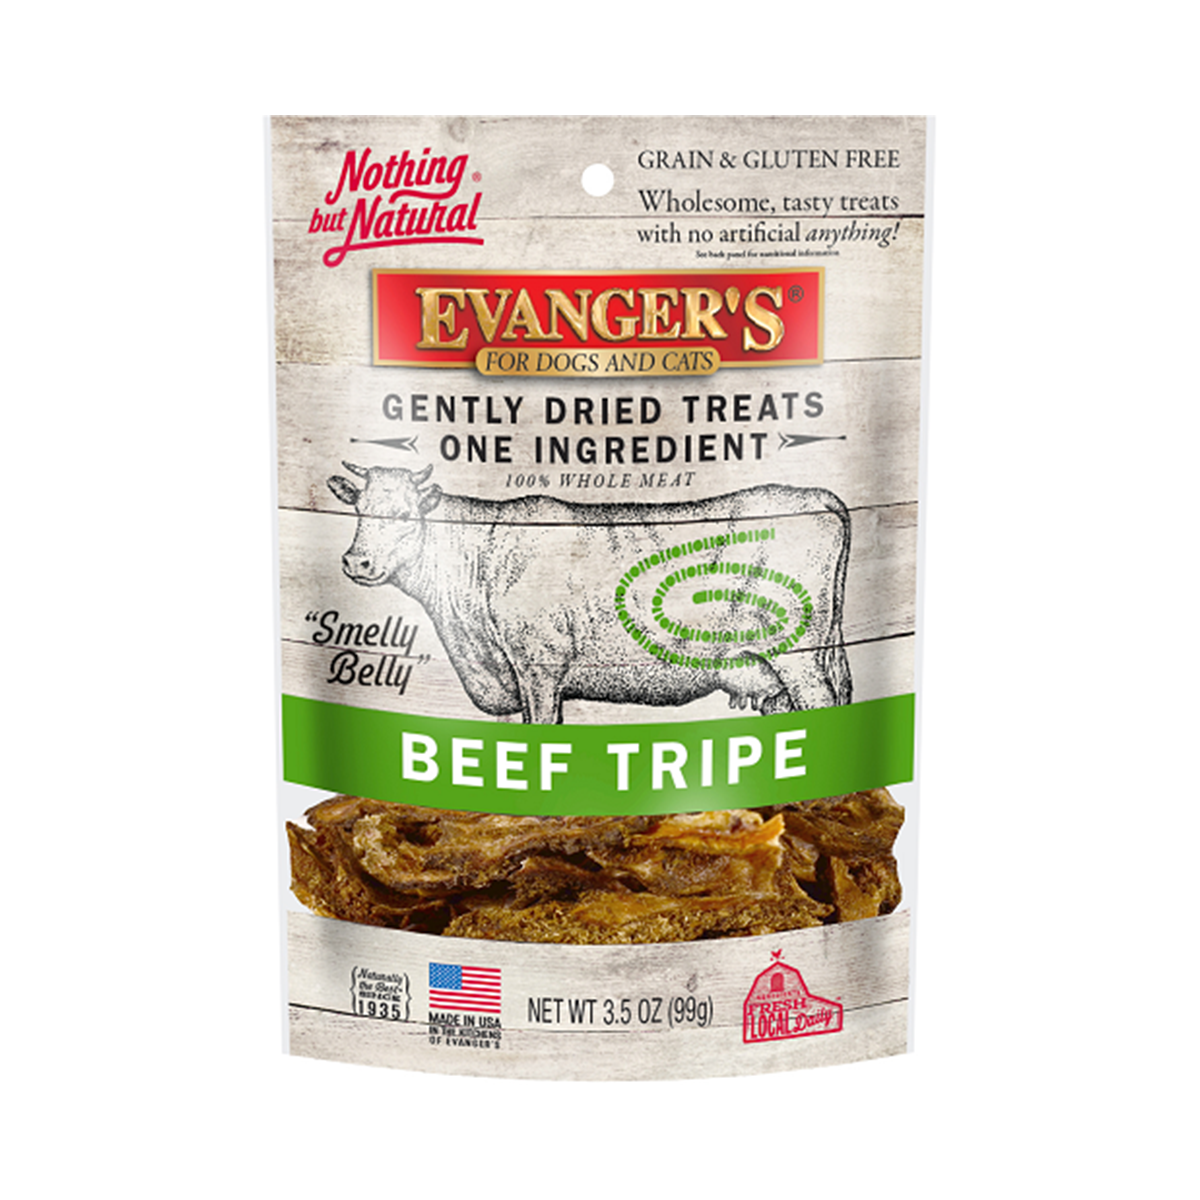 Evangers Gently Dried Dog and Cat Treats - Beef Tripe